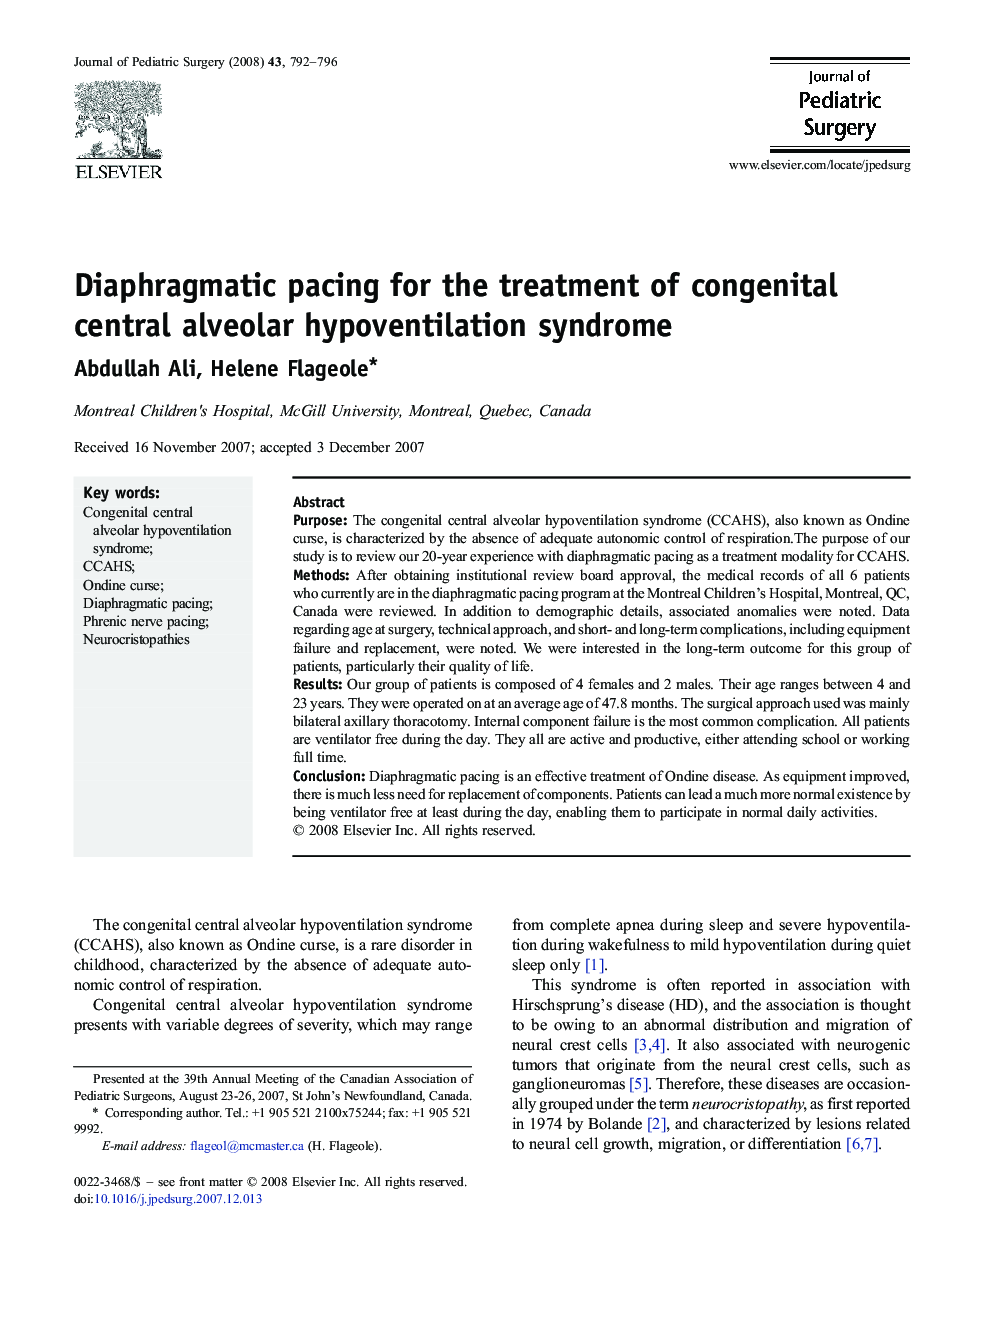 Diaphragmatic pacing for the treatment of congenital central alveolar hypoventilation syndrome 